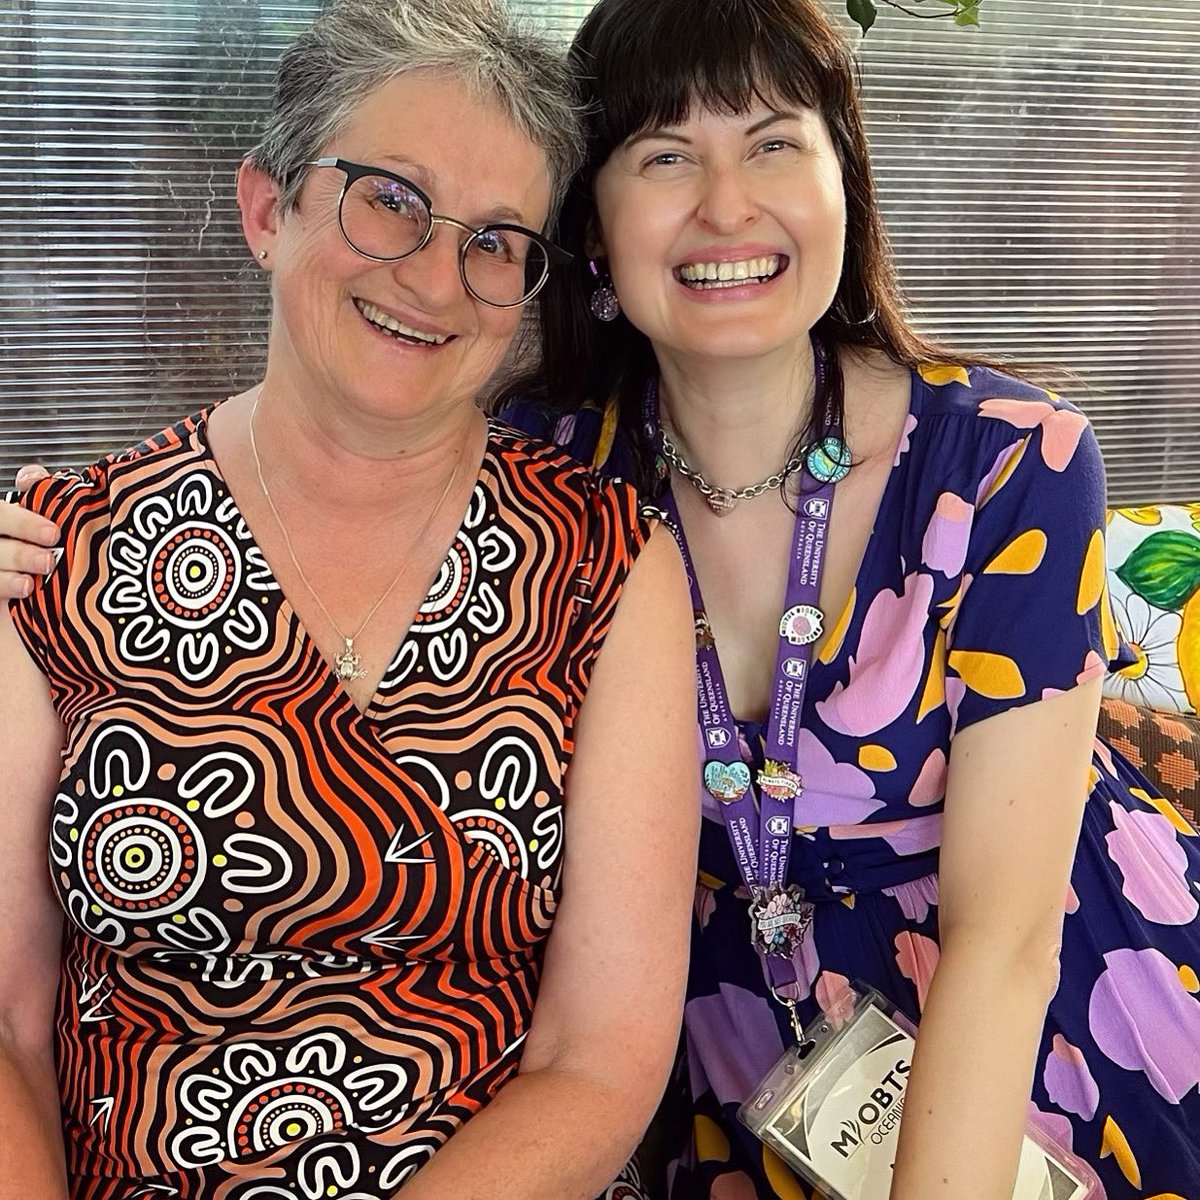 I had a great time at the Management and Organizational Behavior Teaching Society Oceania conference at @UQ_Business this week.👩🏻‍🎓 It was so nice spending time with my wonderful colleagues and a big thank you to Ann, Stuart and the organizing committee!